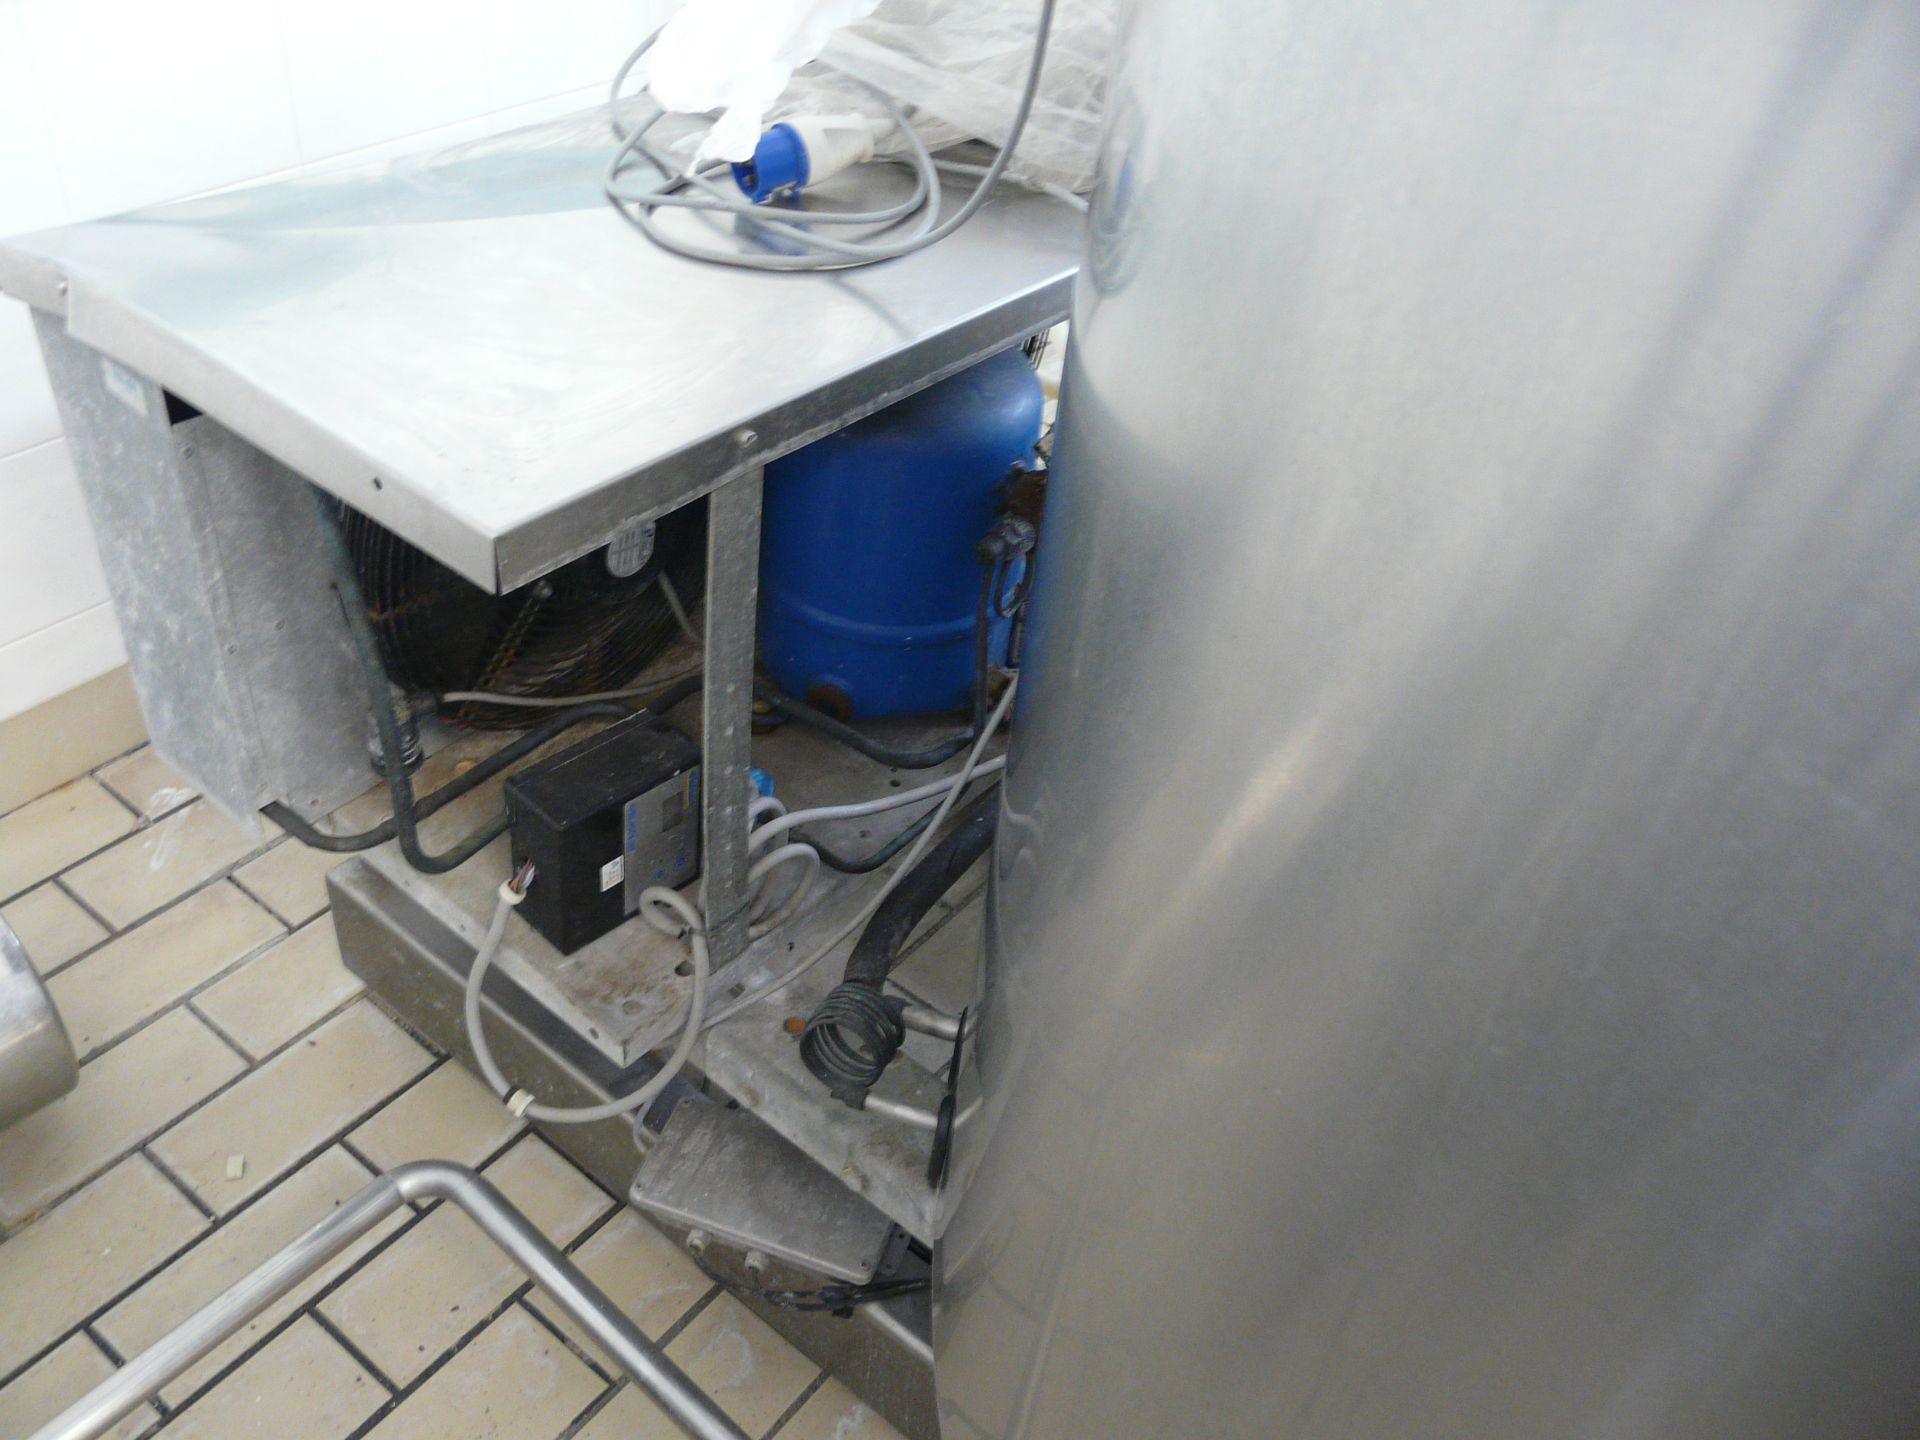 English: Mixing/Cooling Tank for Ice Cream 1020L with Agitator, Type WEDHOLMS, Self Contained - Image 5 of 5